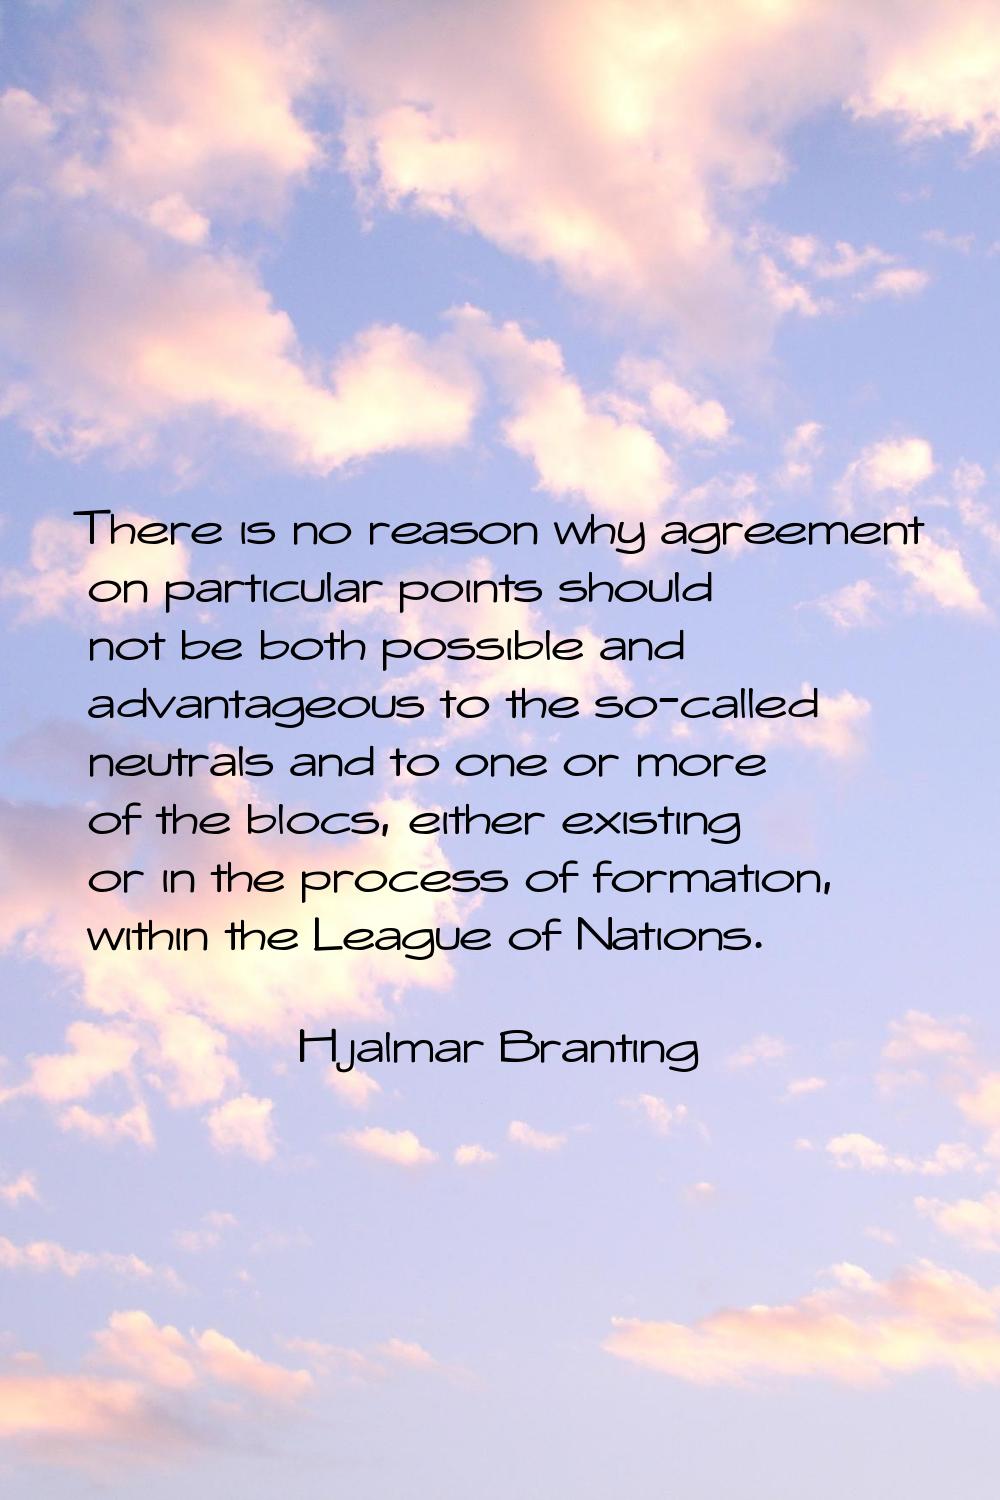 There is no reason why agreement on particular points should not be both possible and advantageous 